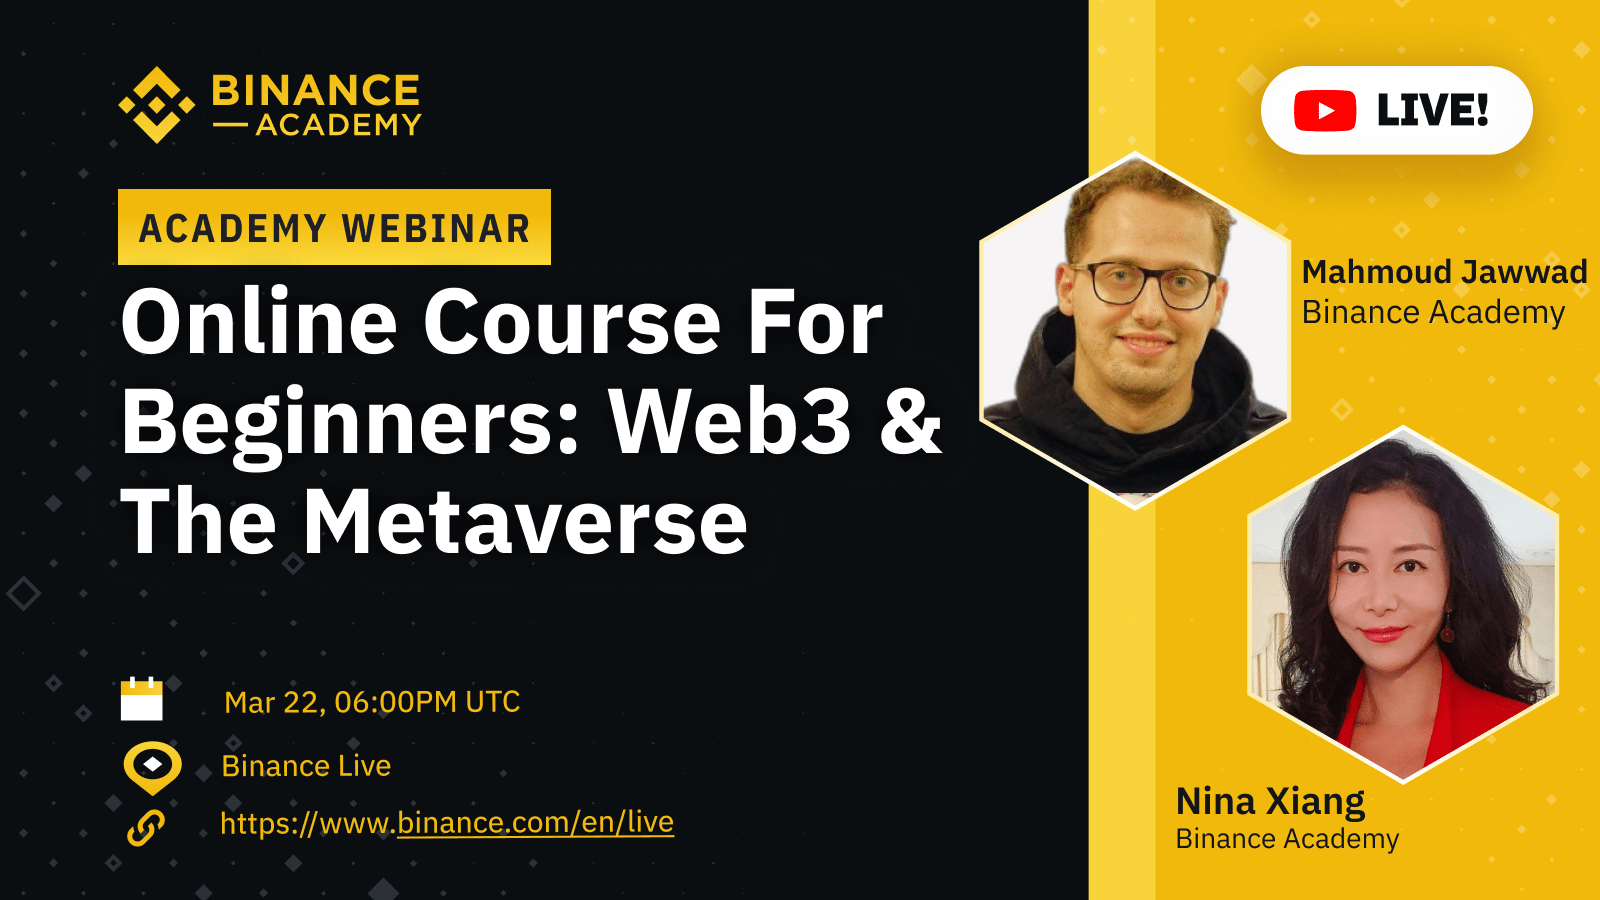 Online Course For Beginners: Web3 & The Metaverse